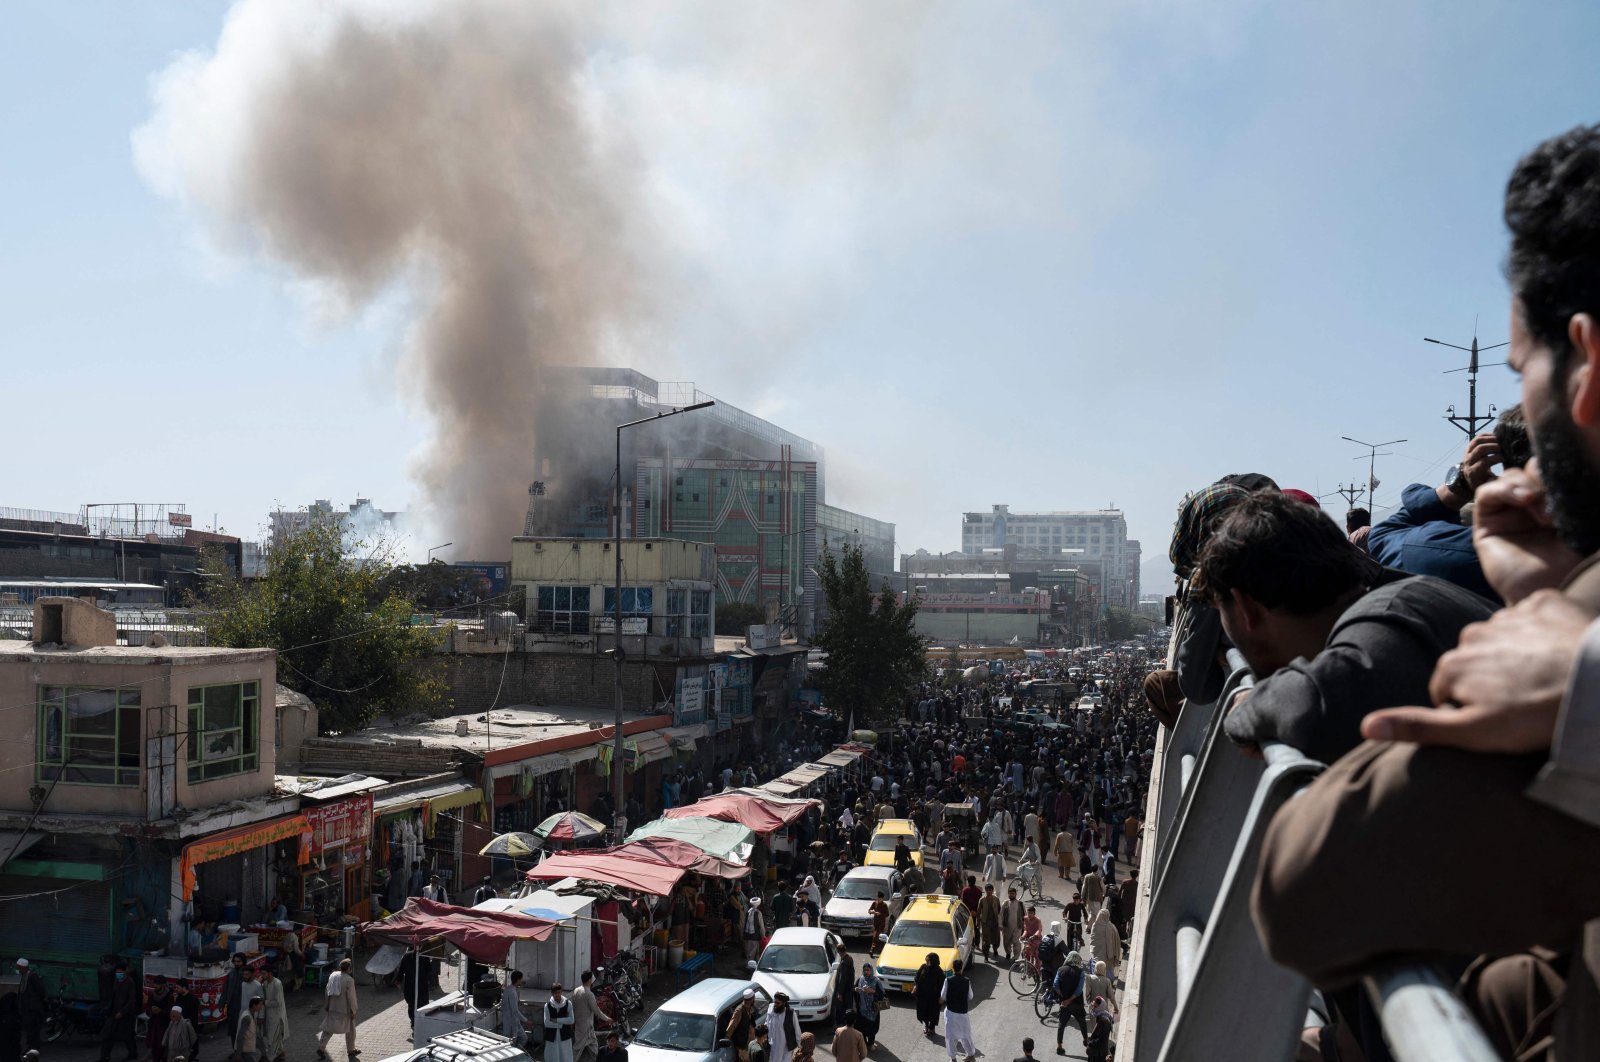 People watch smoke billowing from a fire at a business center mall in Kabul, Afghanistan, Oct. 5, 2022. (Photo by Wakil KOHSAR / AFP)